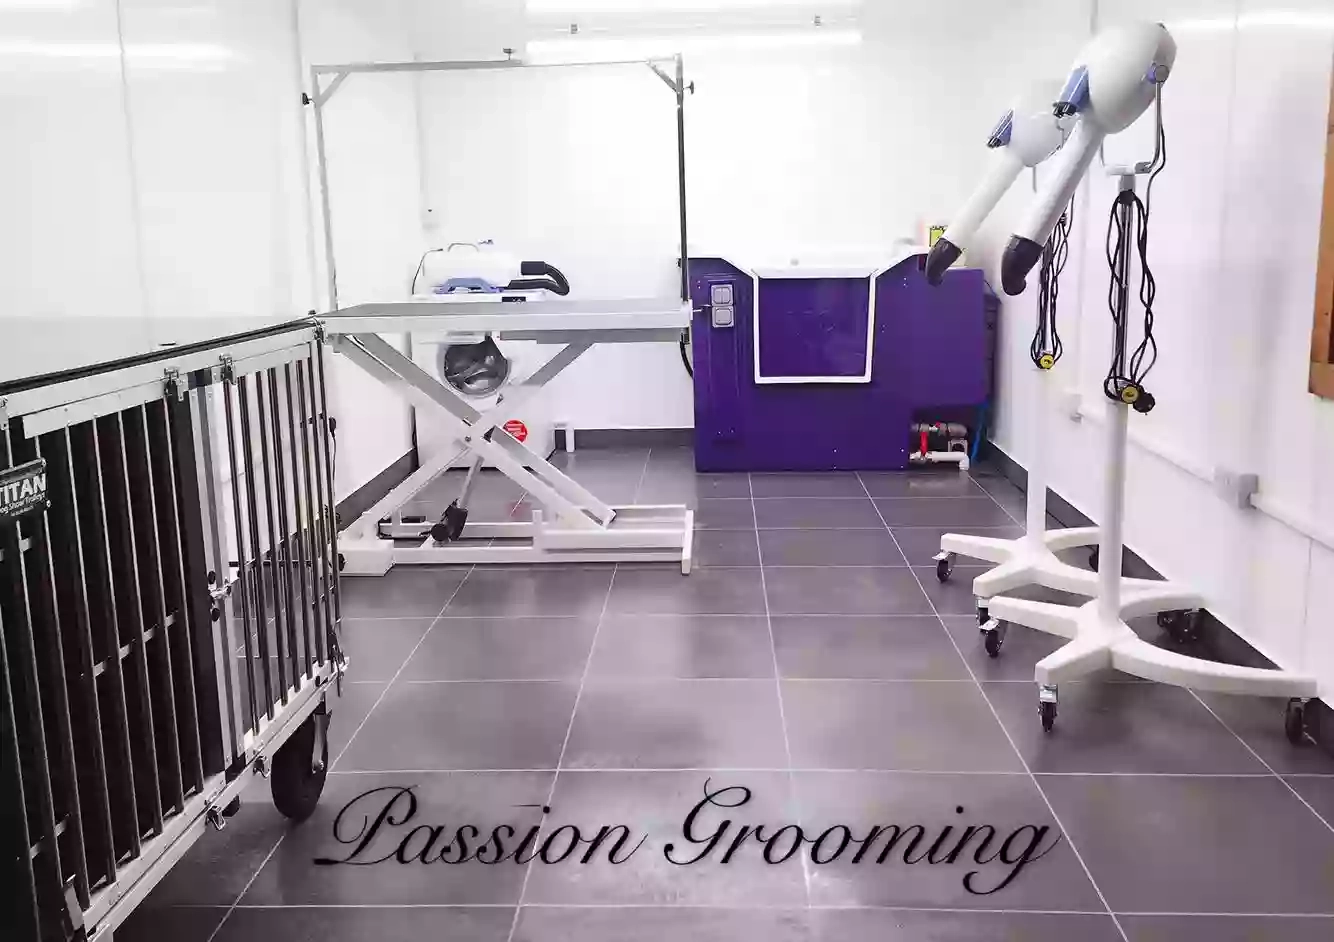 Passion Grooming Limited